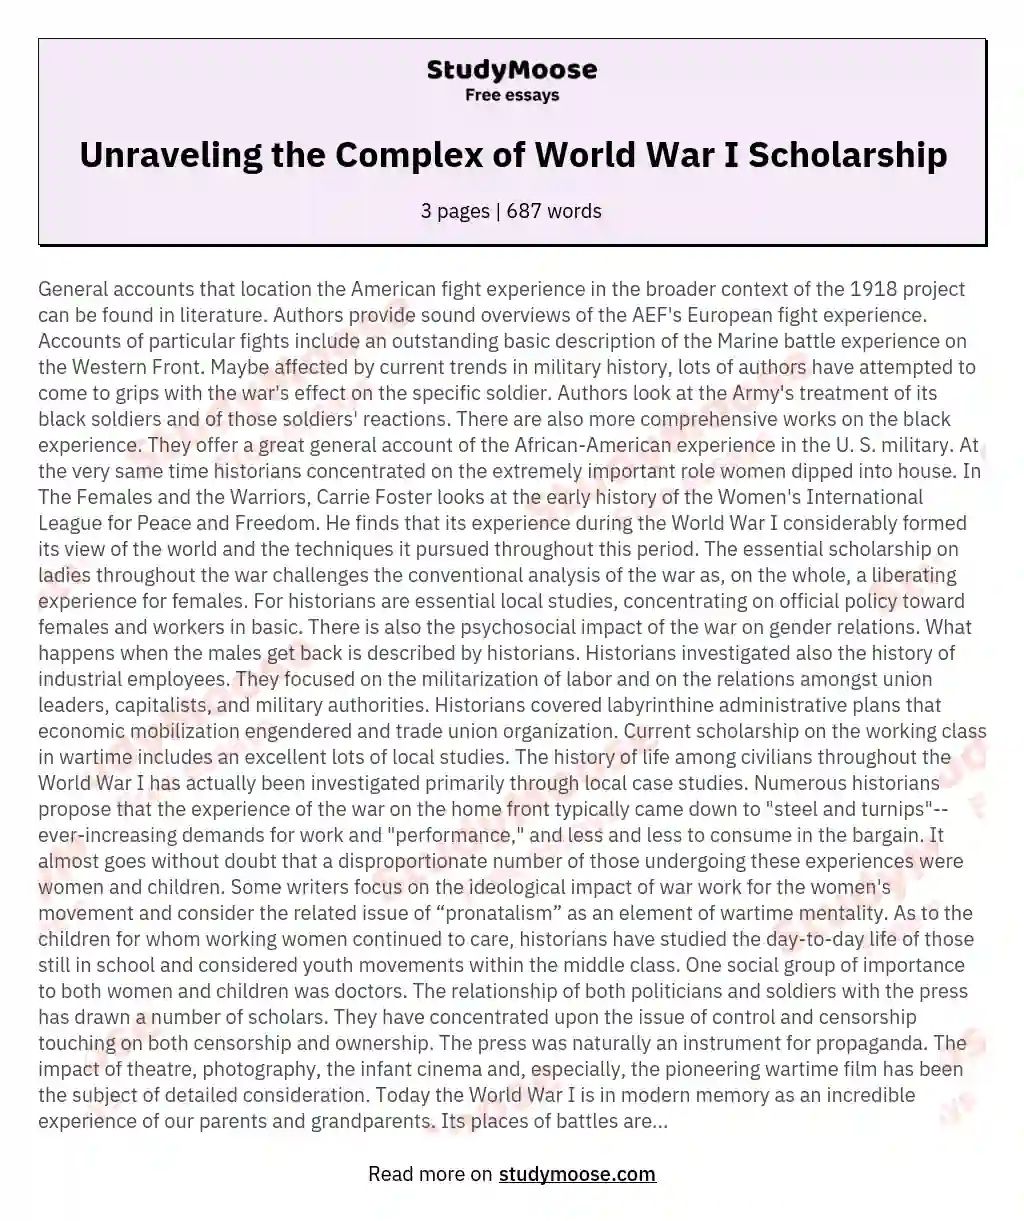 Unraveling the Complex of World War I Scholarship essay